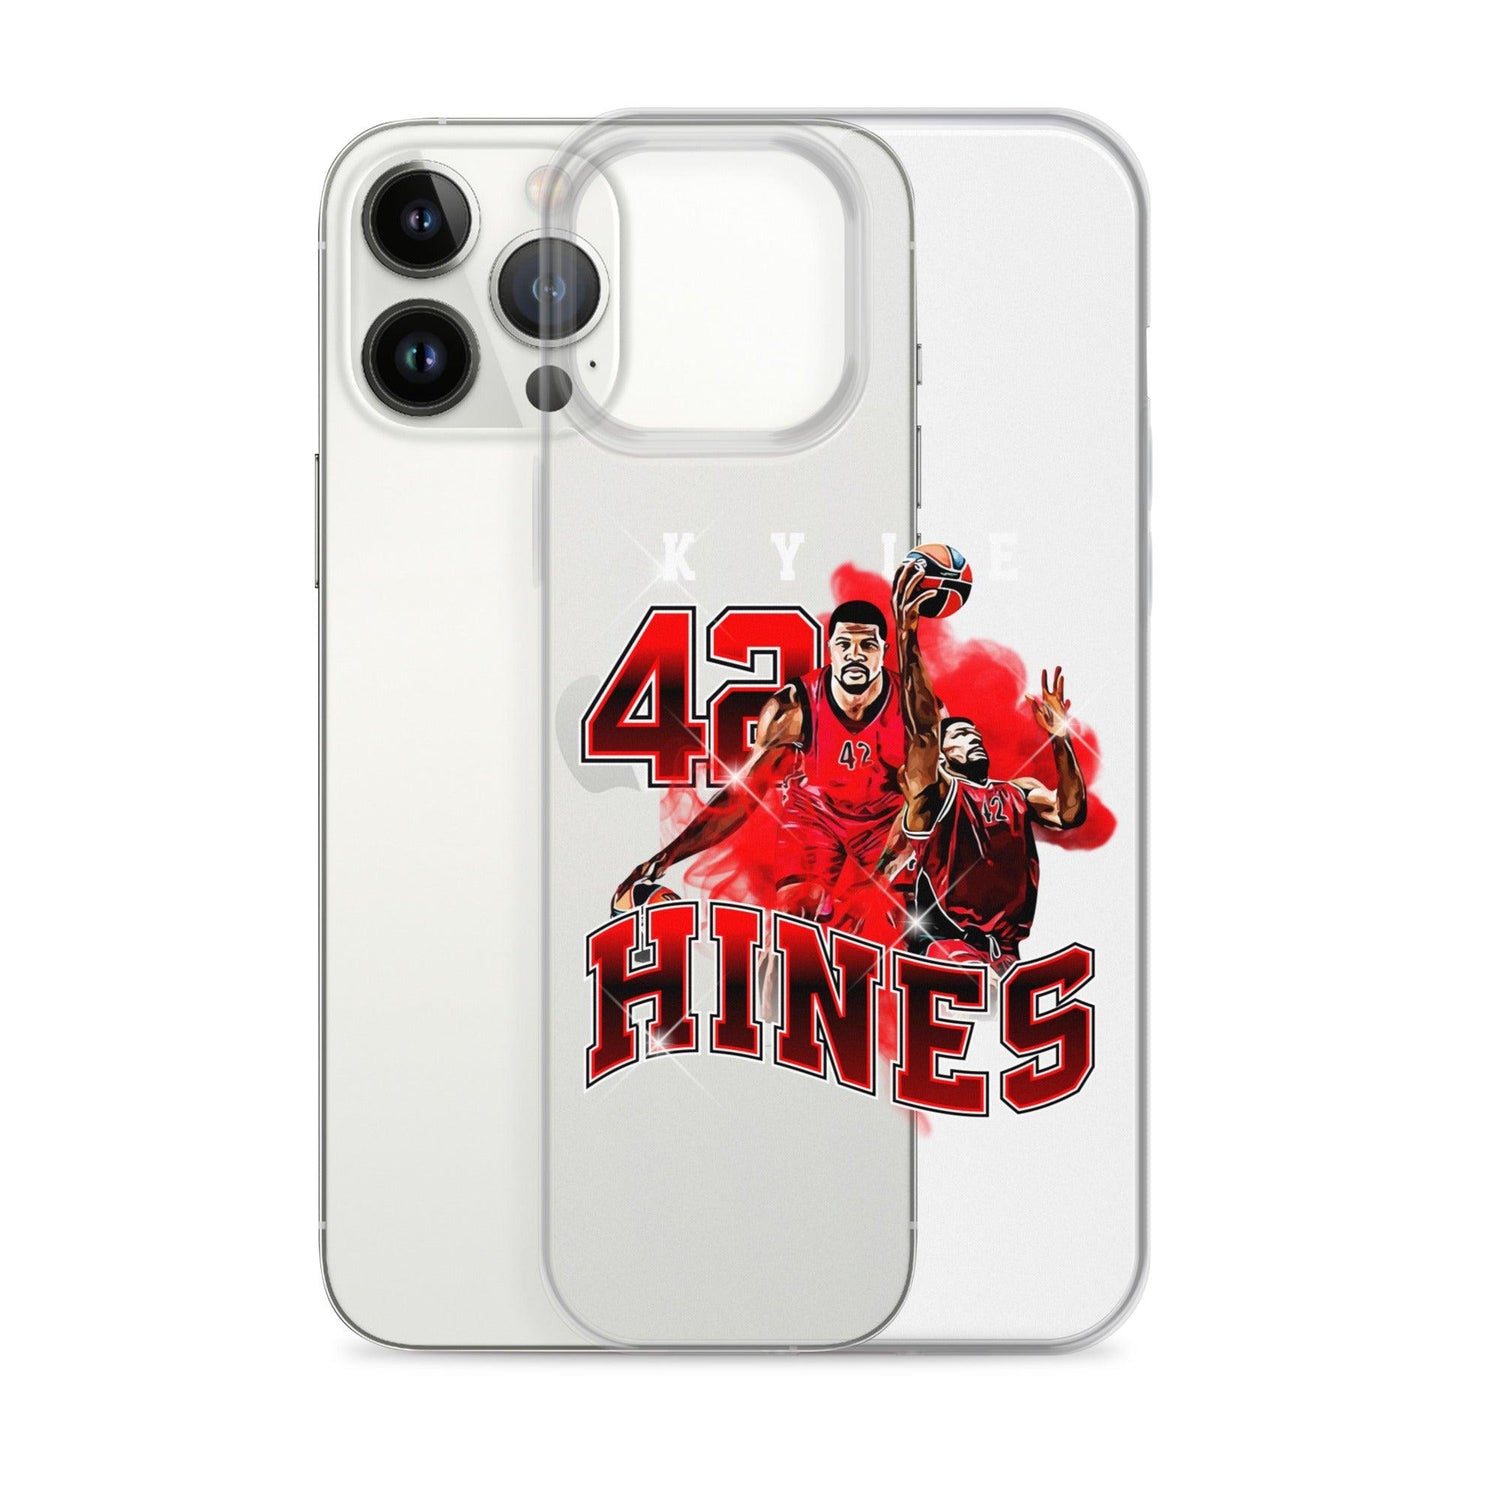 Kyle Hines "Career" iPhone Case - Fan Arch